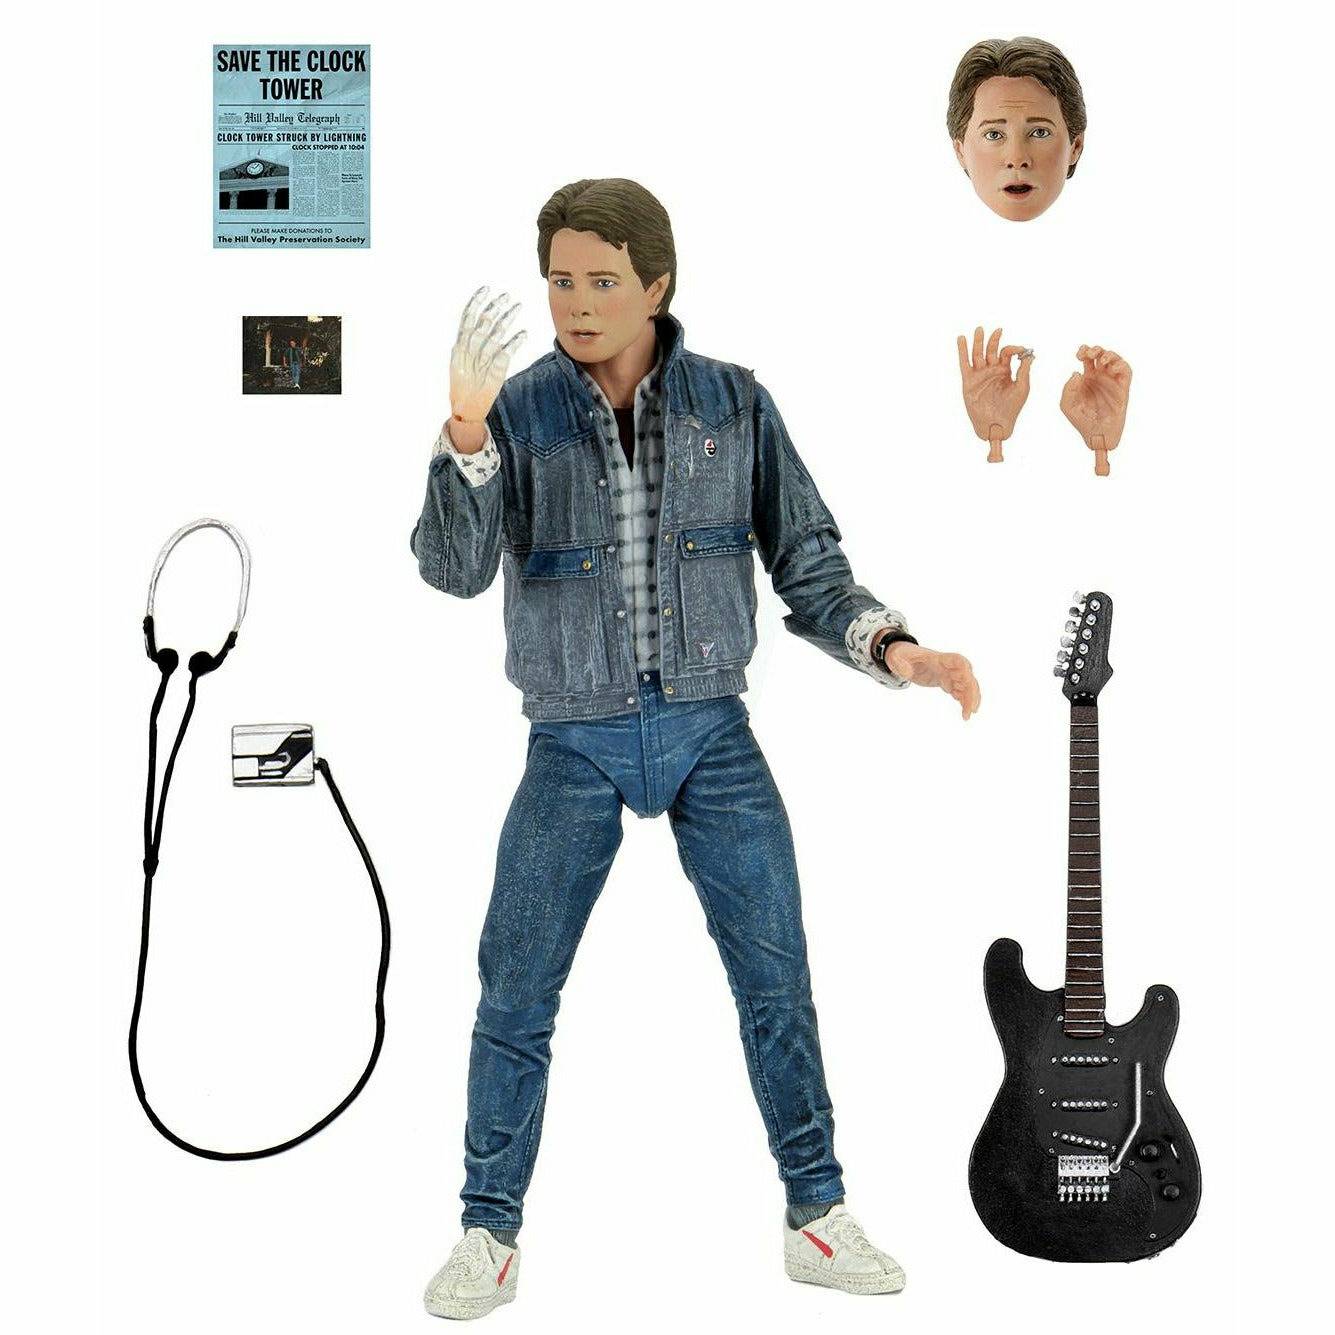 NECA Back to the Future 7" Scale Action Figure - Ultimate Marty McFly (1985 "Audition")